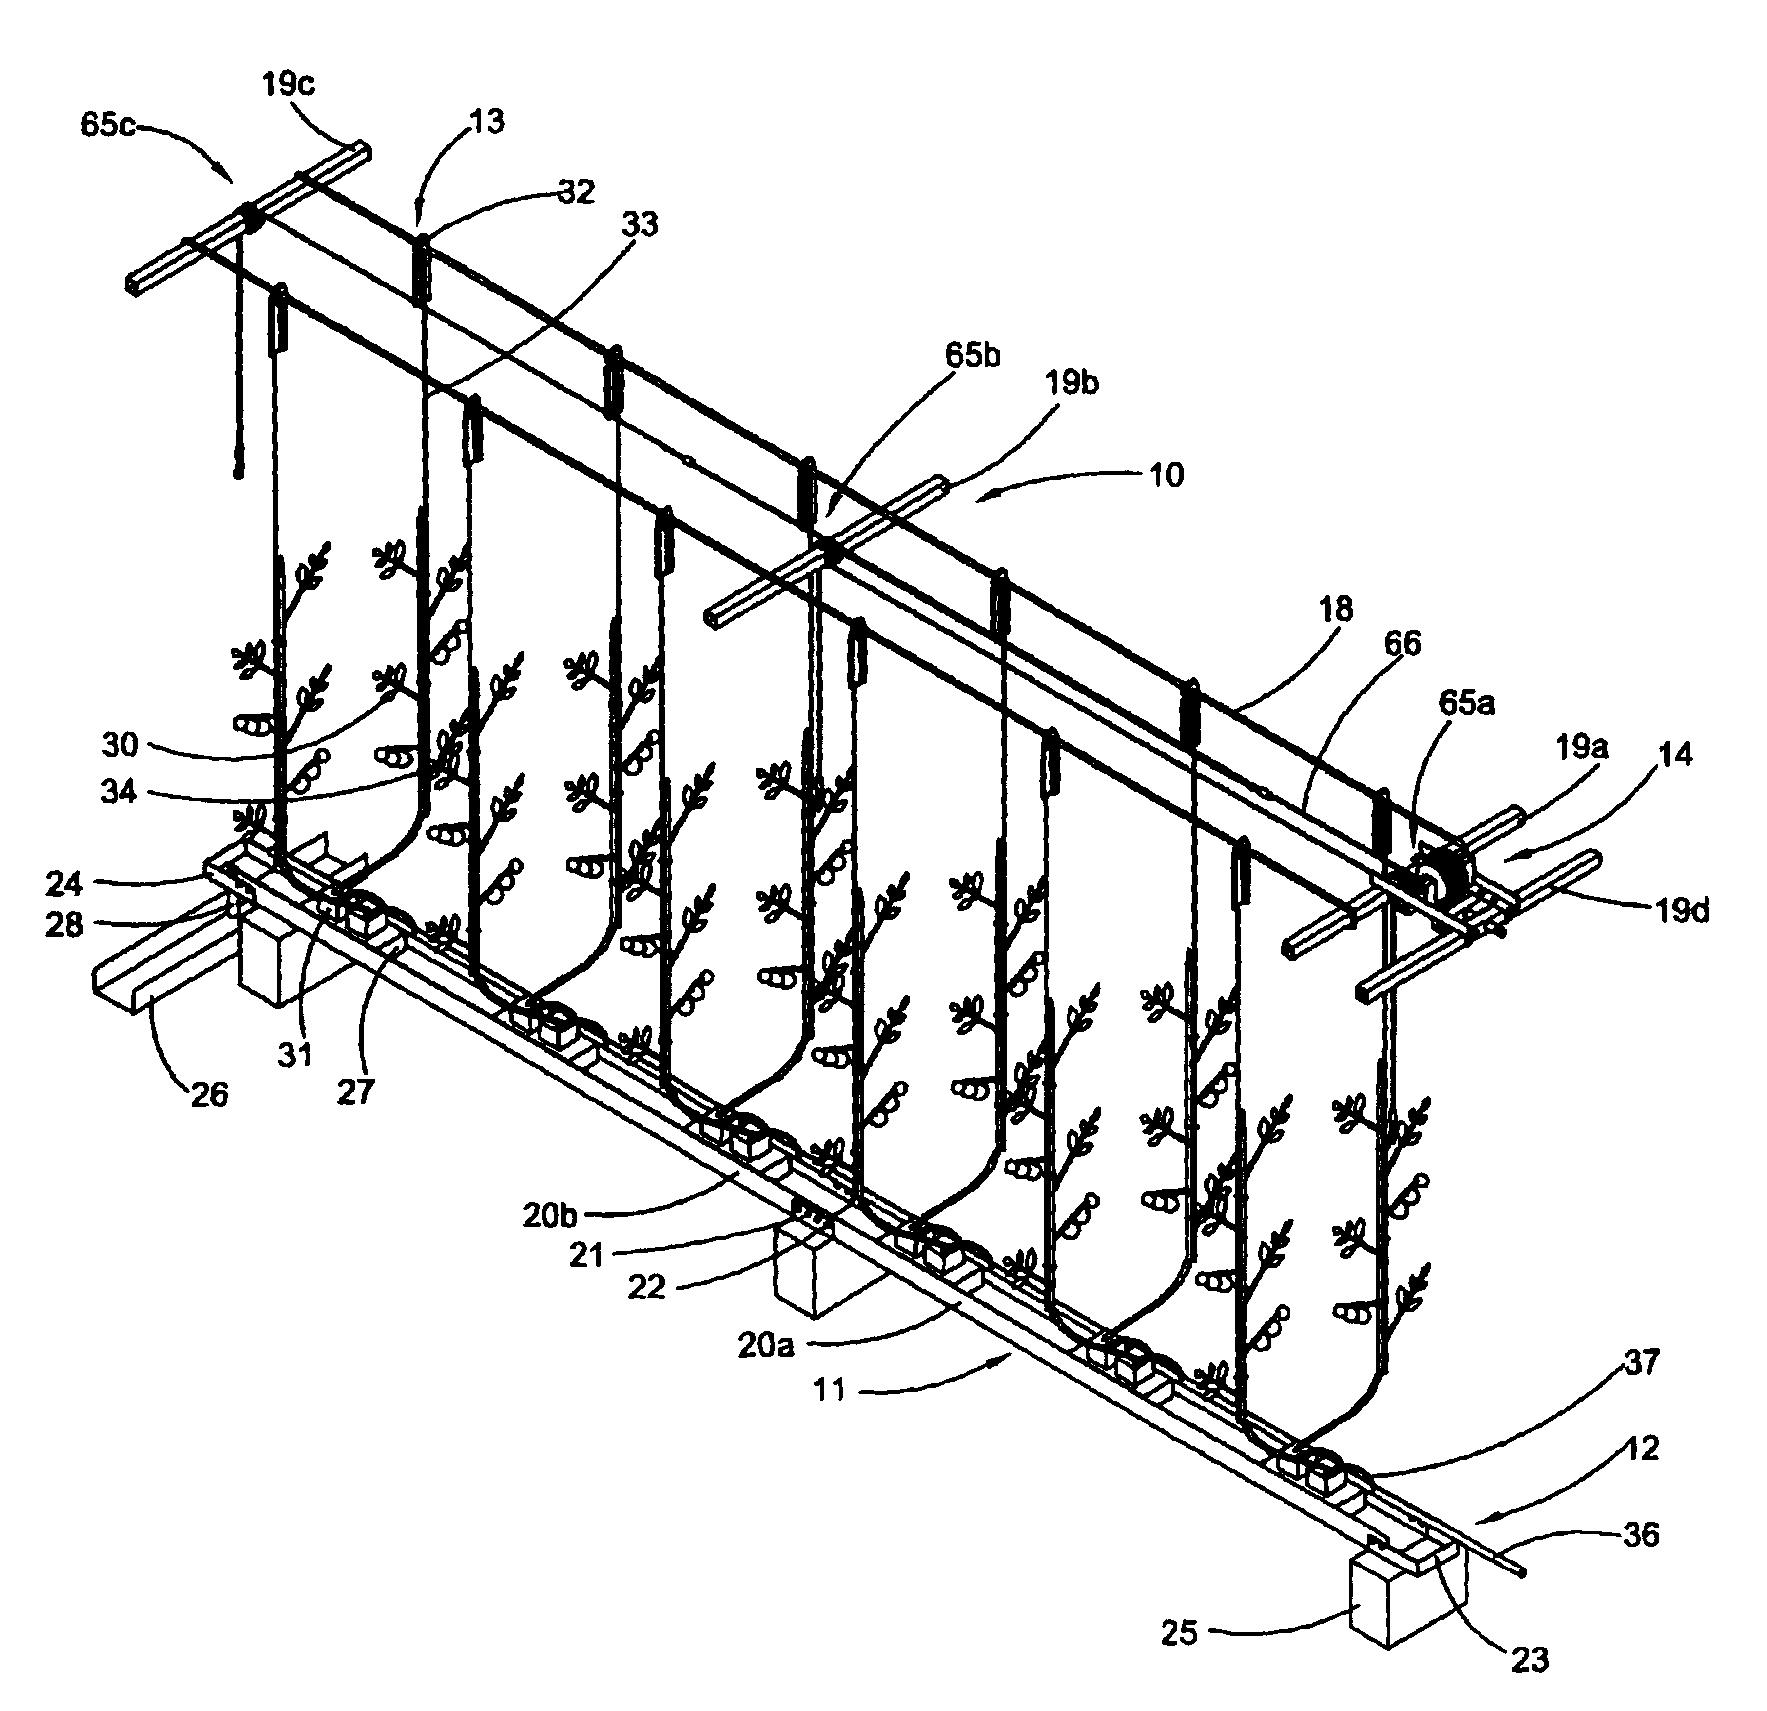 Method and apparatus for growing vine crops in a greenhouse